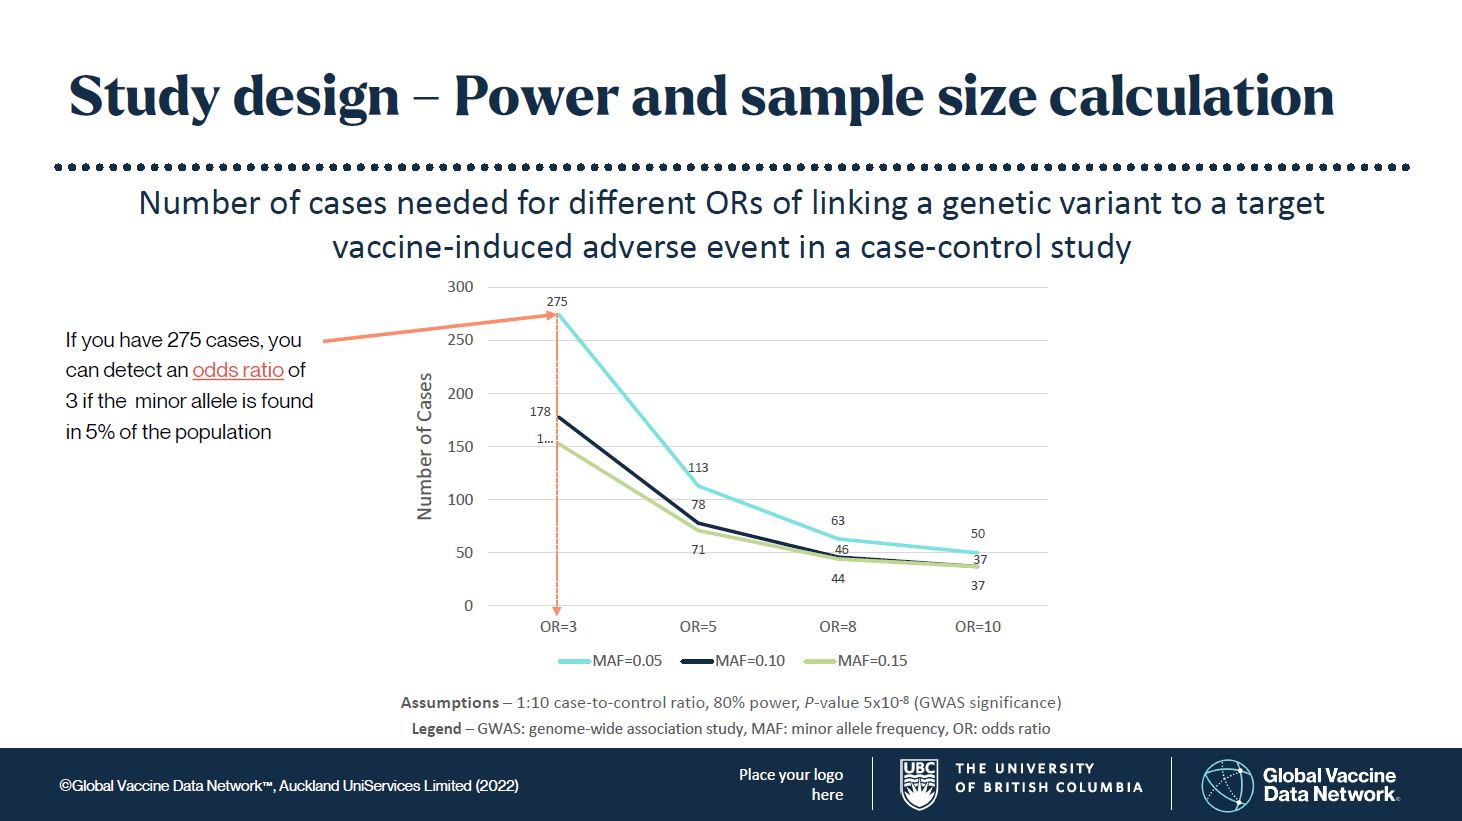 Study design Power and sample size calculation image